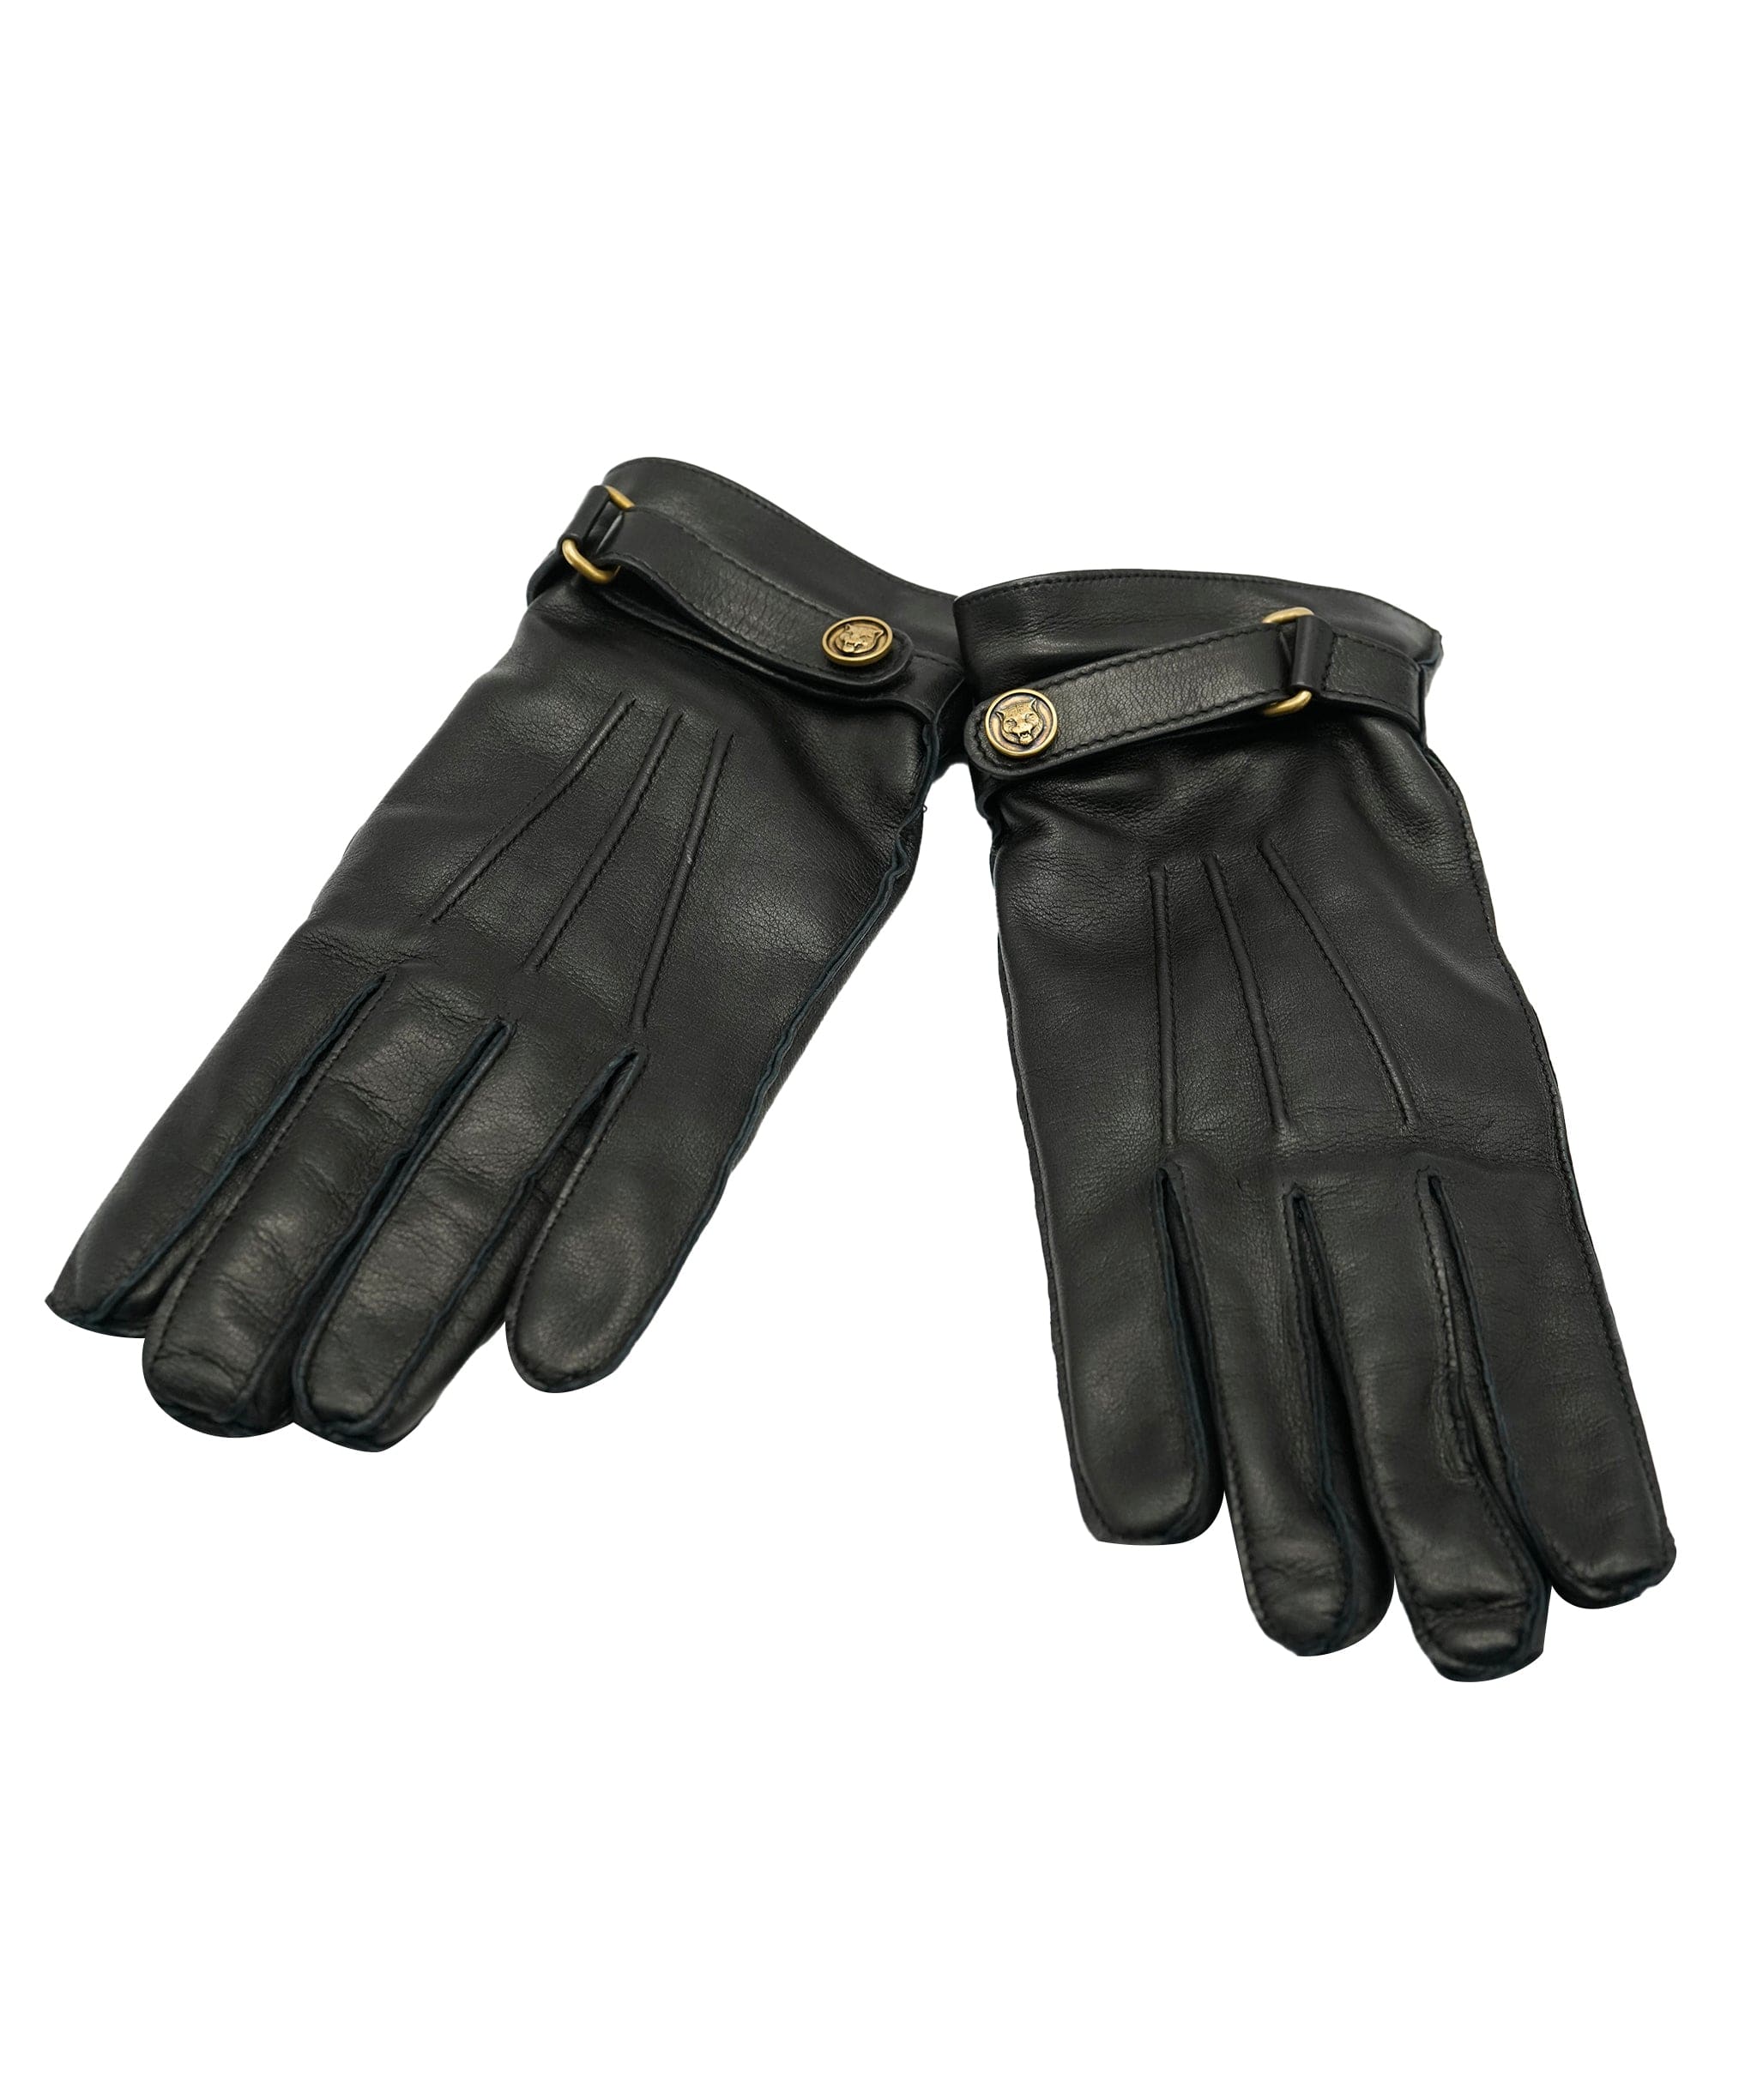 Gucci Gucci Leather Gloves Size 9.5 AVL1437